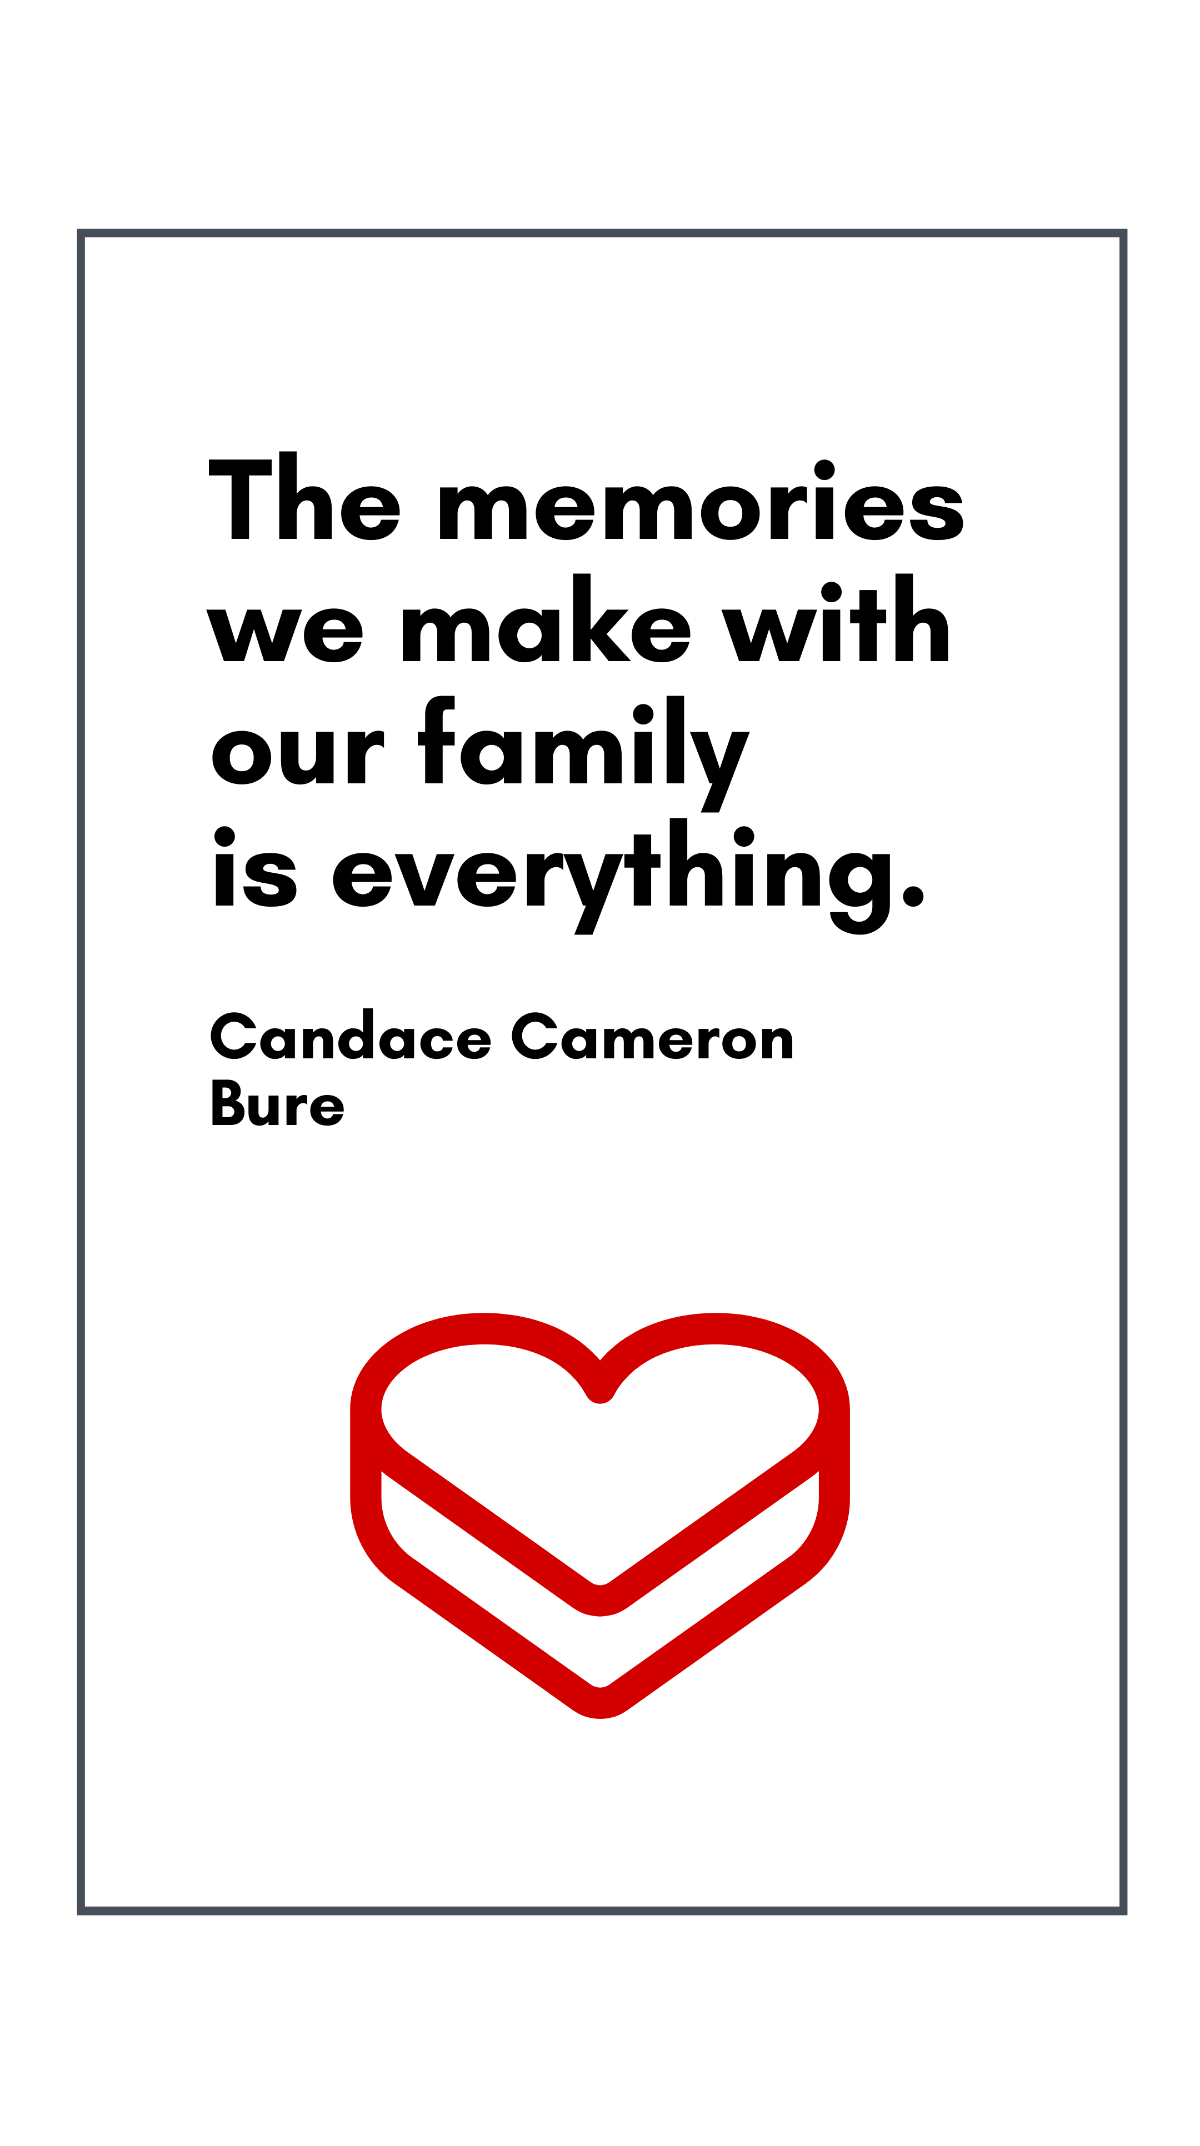 Candace Cameron Bure - The memories we make with our family is everything. Template